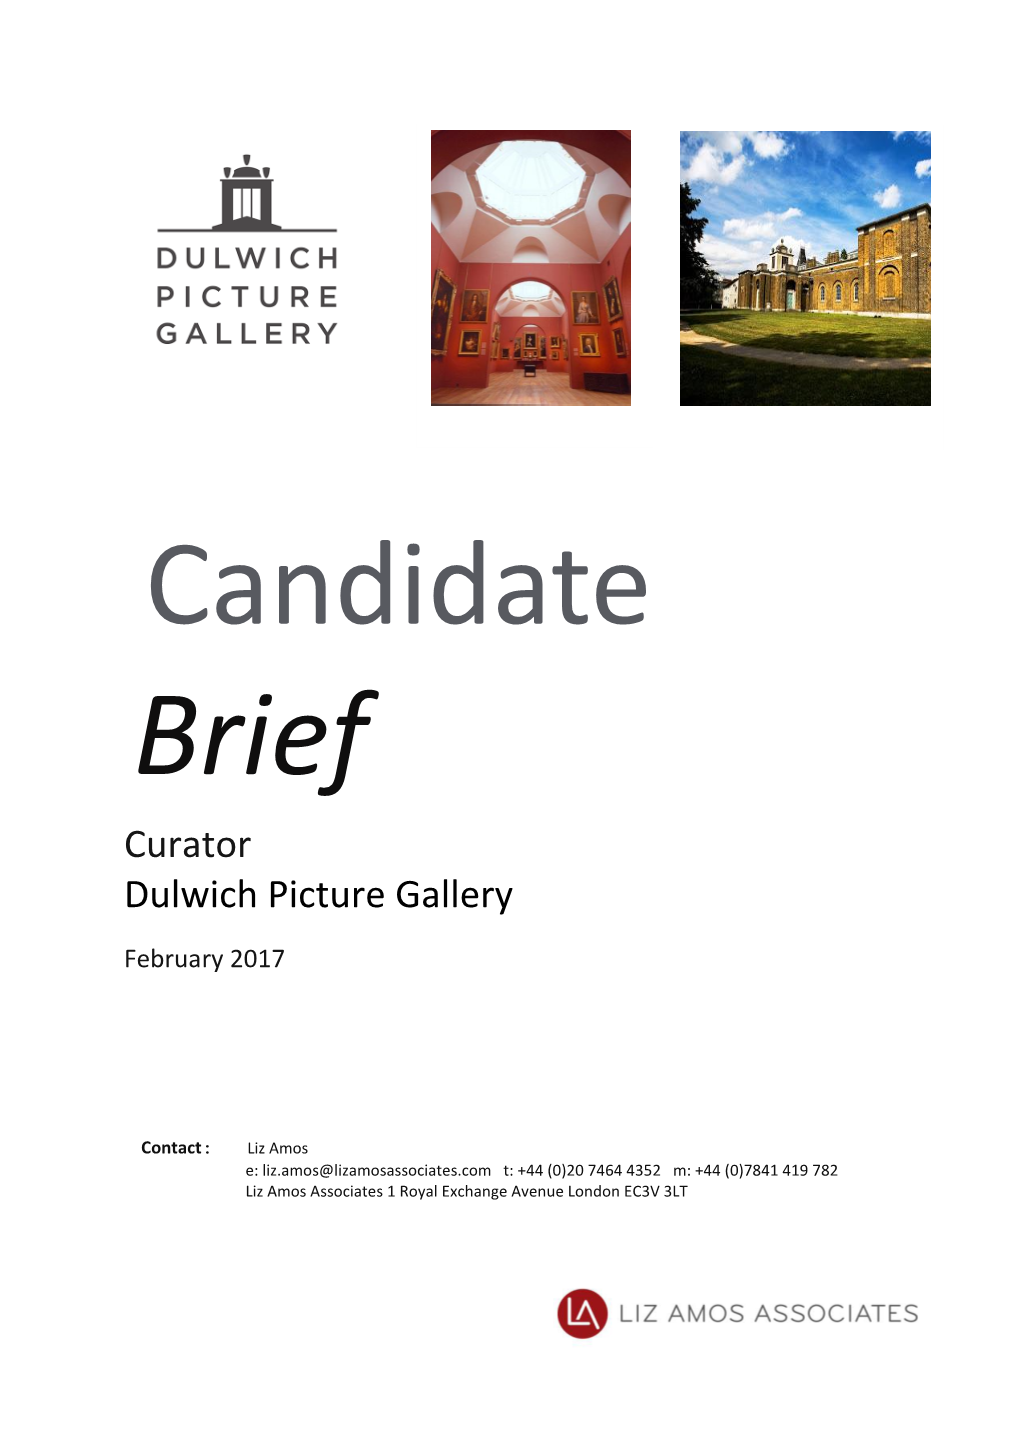 Curator Dulwich Picture Gallery